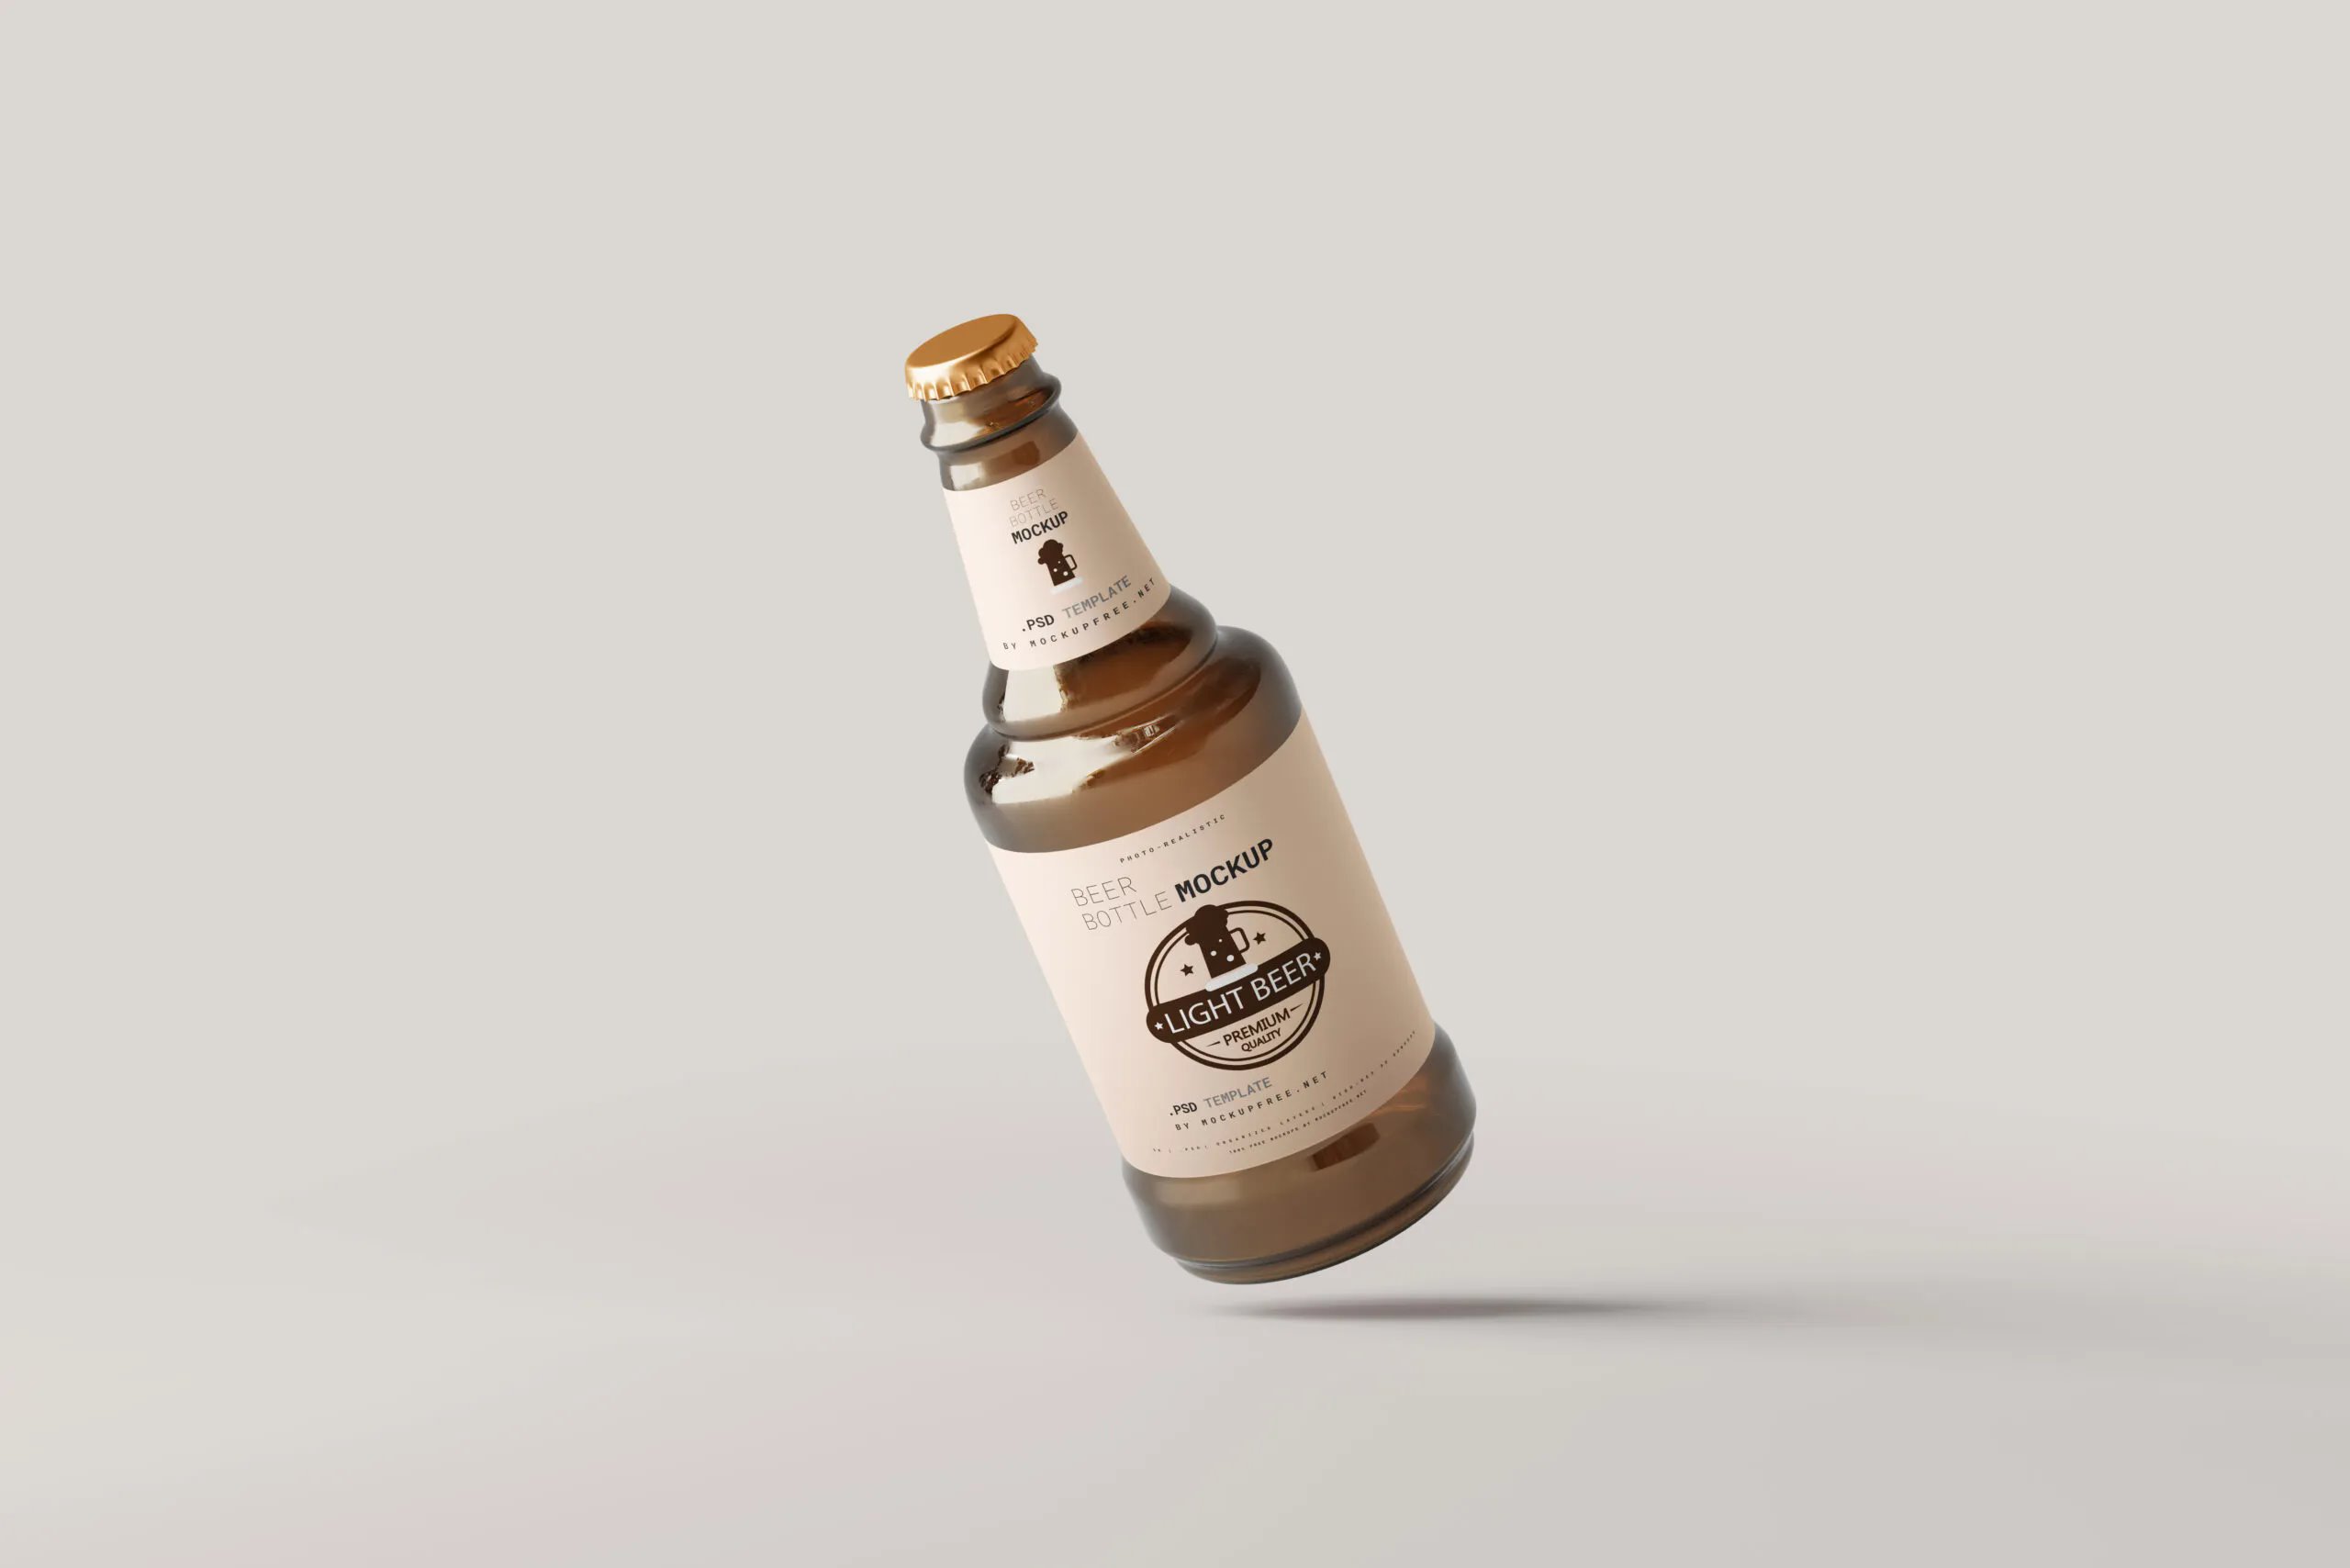 5 Stubby Beer Bottle Mockups in Different Visions FREE PSD